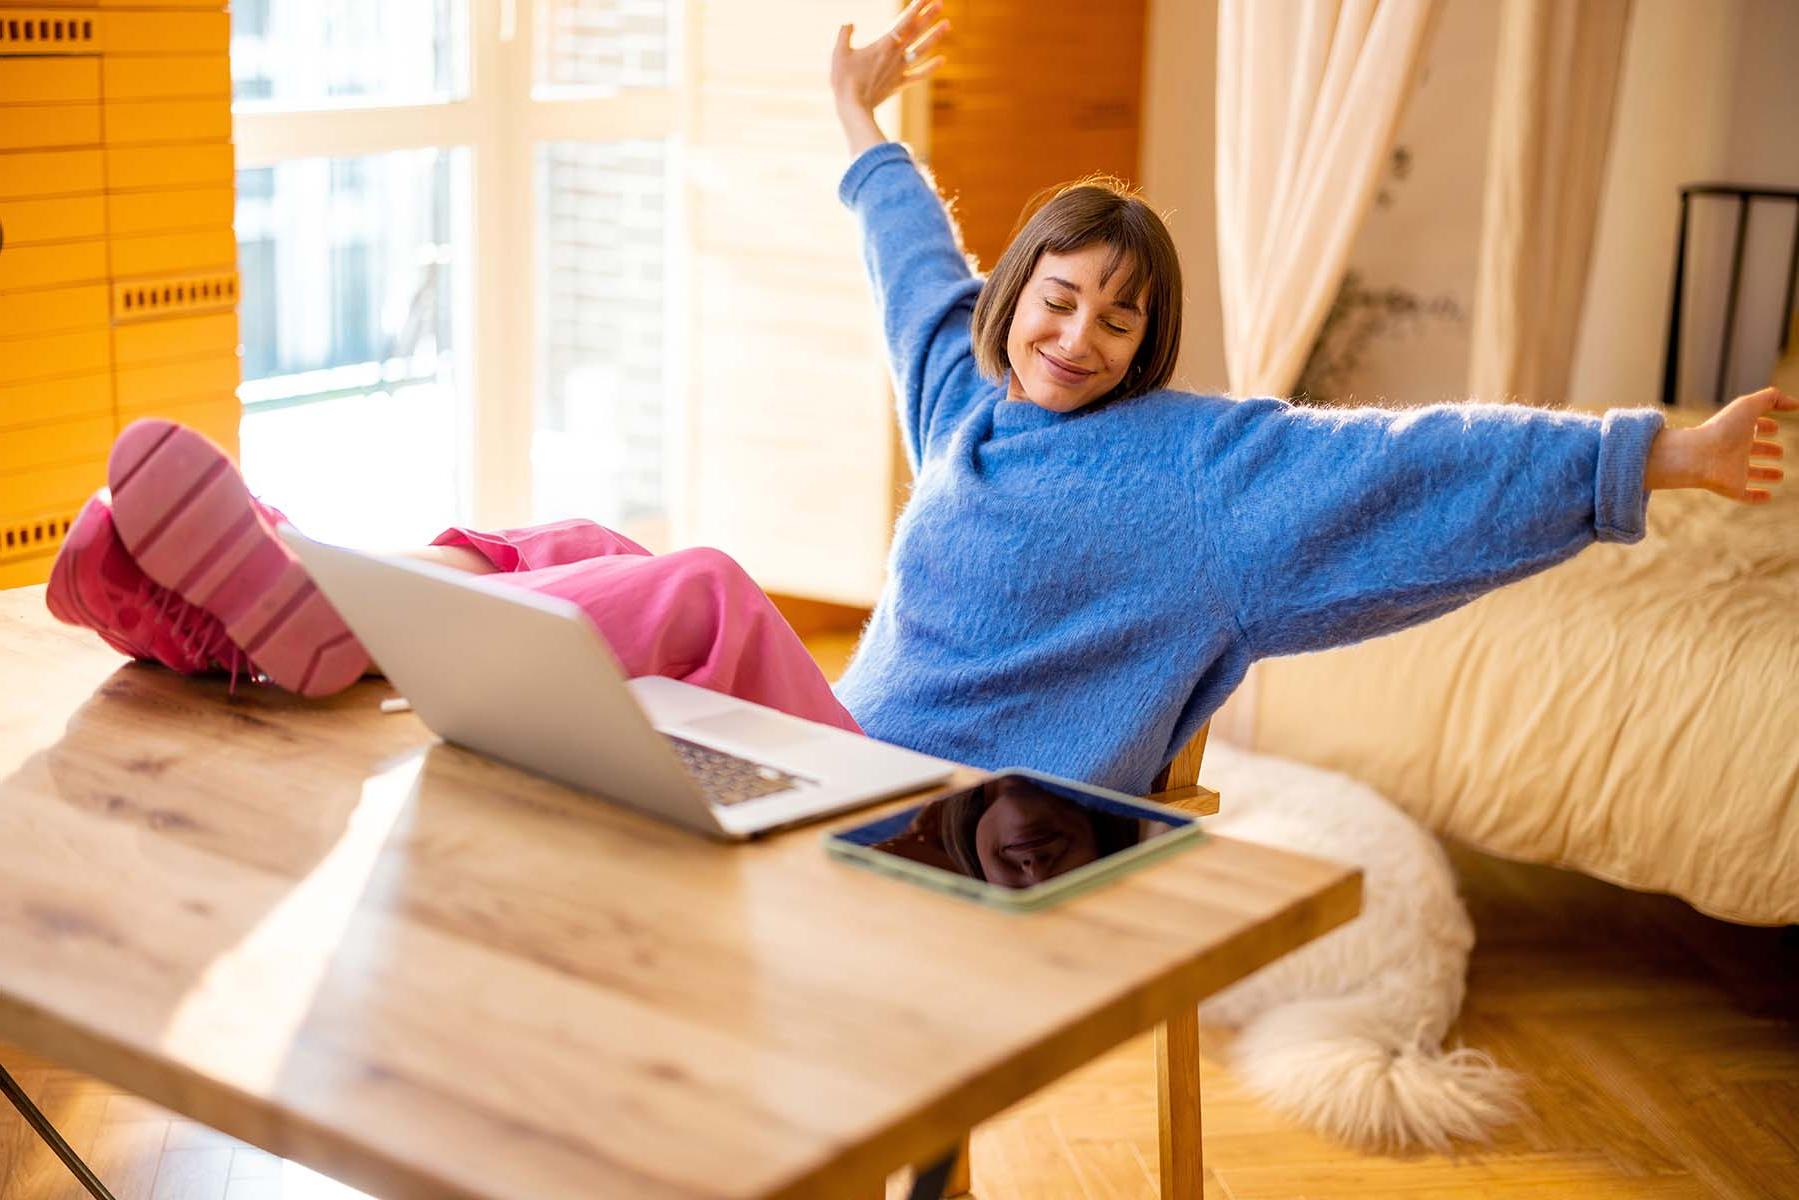 A woman stretching with joy at a table with a laptop.